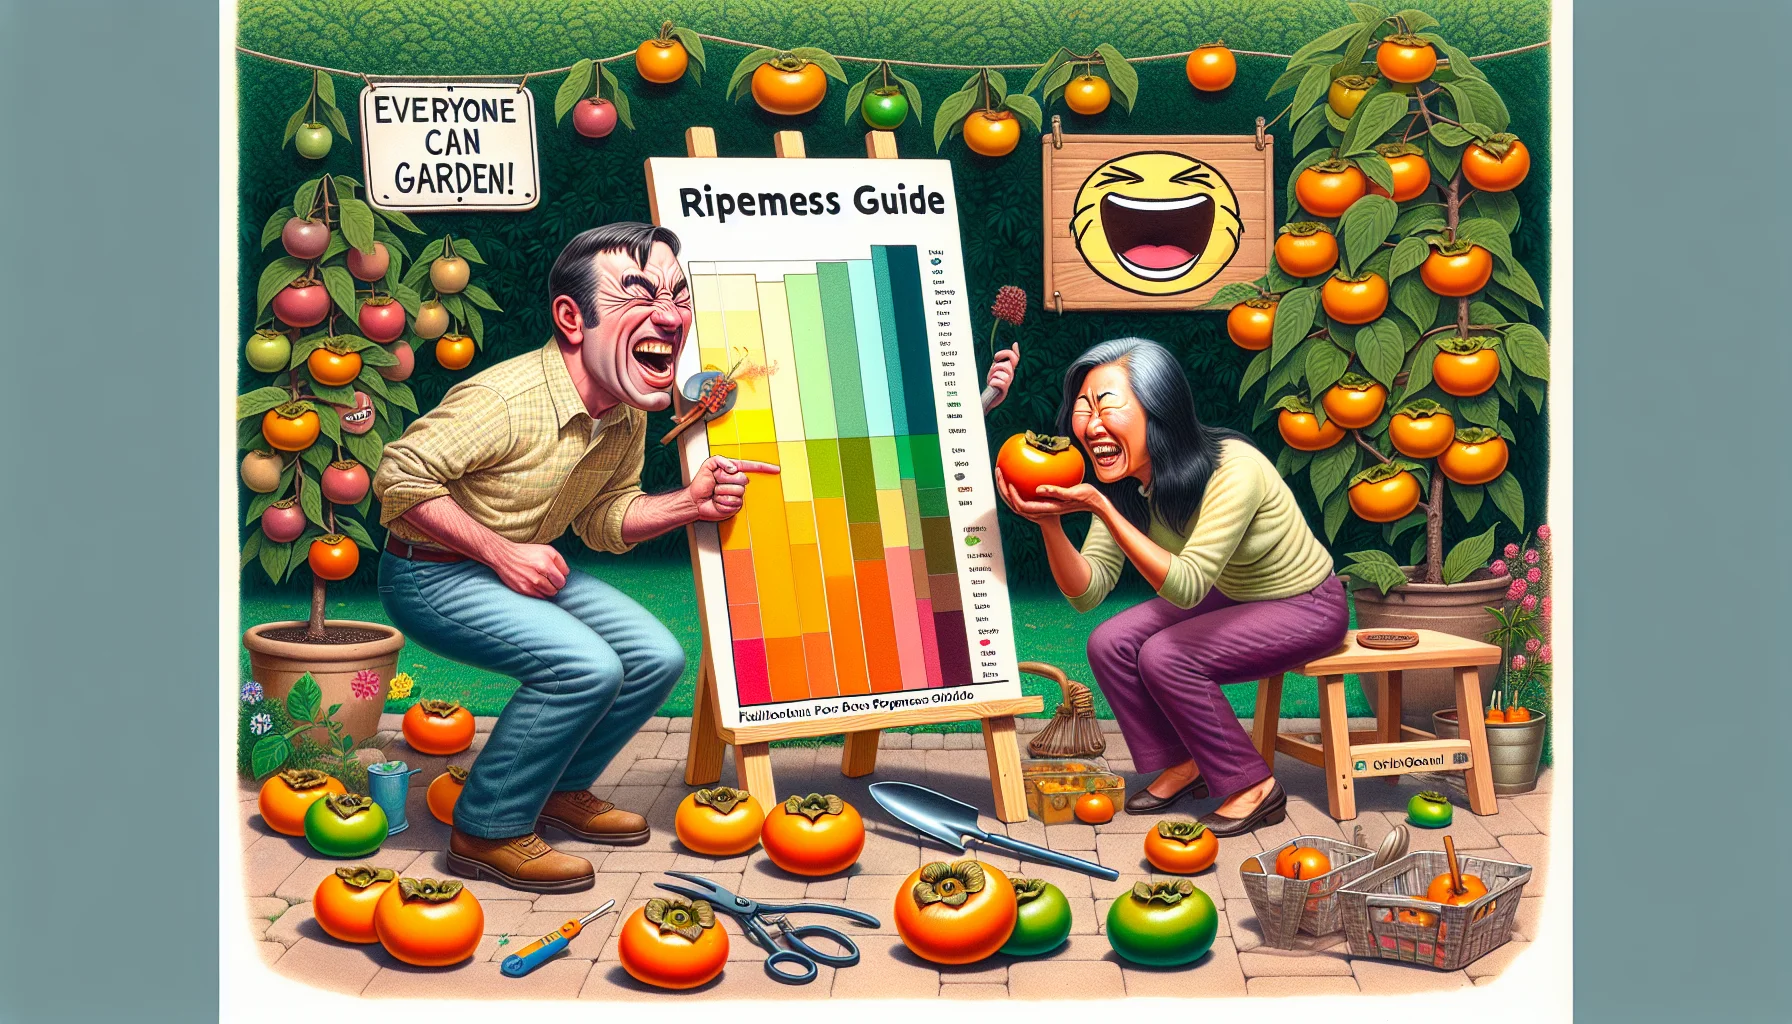 Create a detailed scene of a quirky and humorous situation in a lush home garden. It should feature two distinct characters, a Caucasian man with his eyes squeezed shut, sniffing a persimmon enthusiastically, and a South Asian woman laughing and holding a color gradient chart of persimmons, transitioning from light green to deep orange. The chart should be titled 'Ripeness Guide' with emblems of laughs in the corners. Surroundings include a variety of fruit trees bursting with produce, gardening tools scattered playfully and a stickered sign reading 'Everyone can garden!' to create an inviting atmosphere.